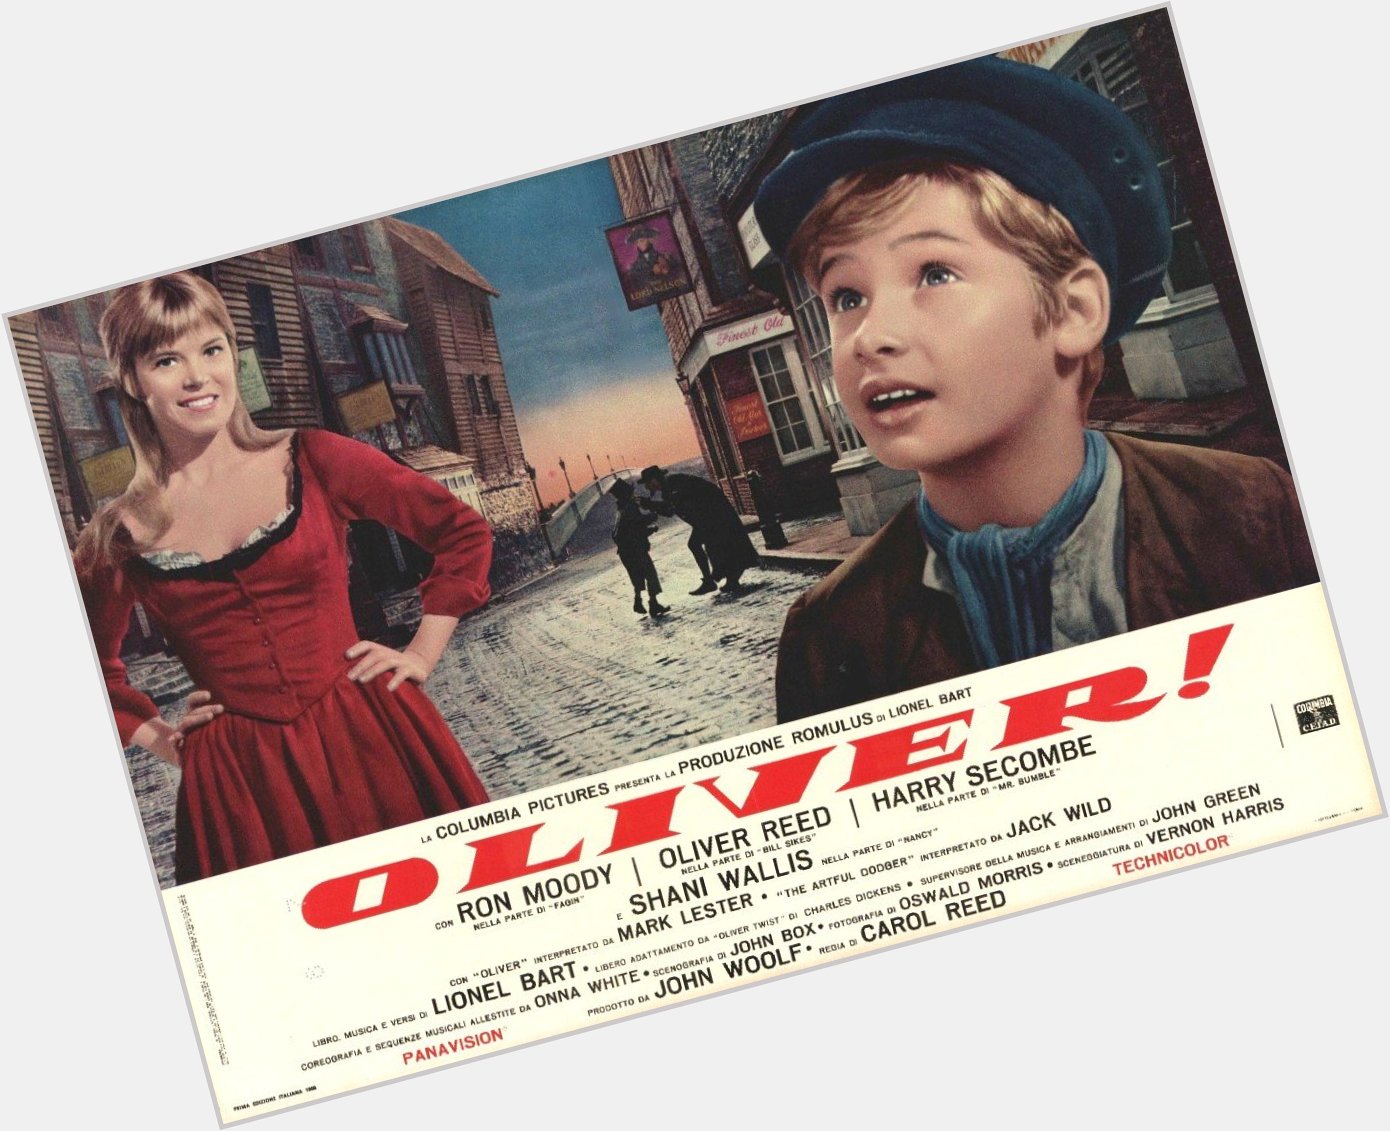 Happy Birthday to Shani Wallis, born on Apr. 14th! Here she is in a promo for Oliver (film). 